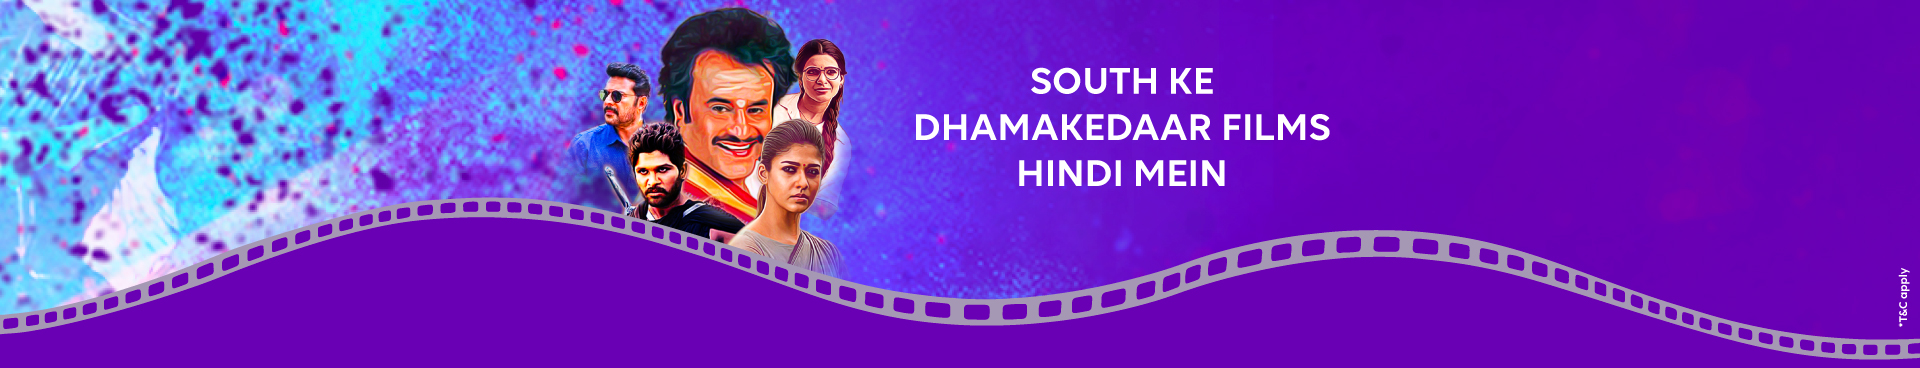 South Movies Banner